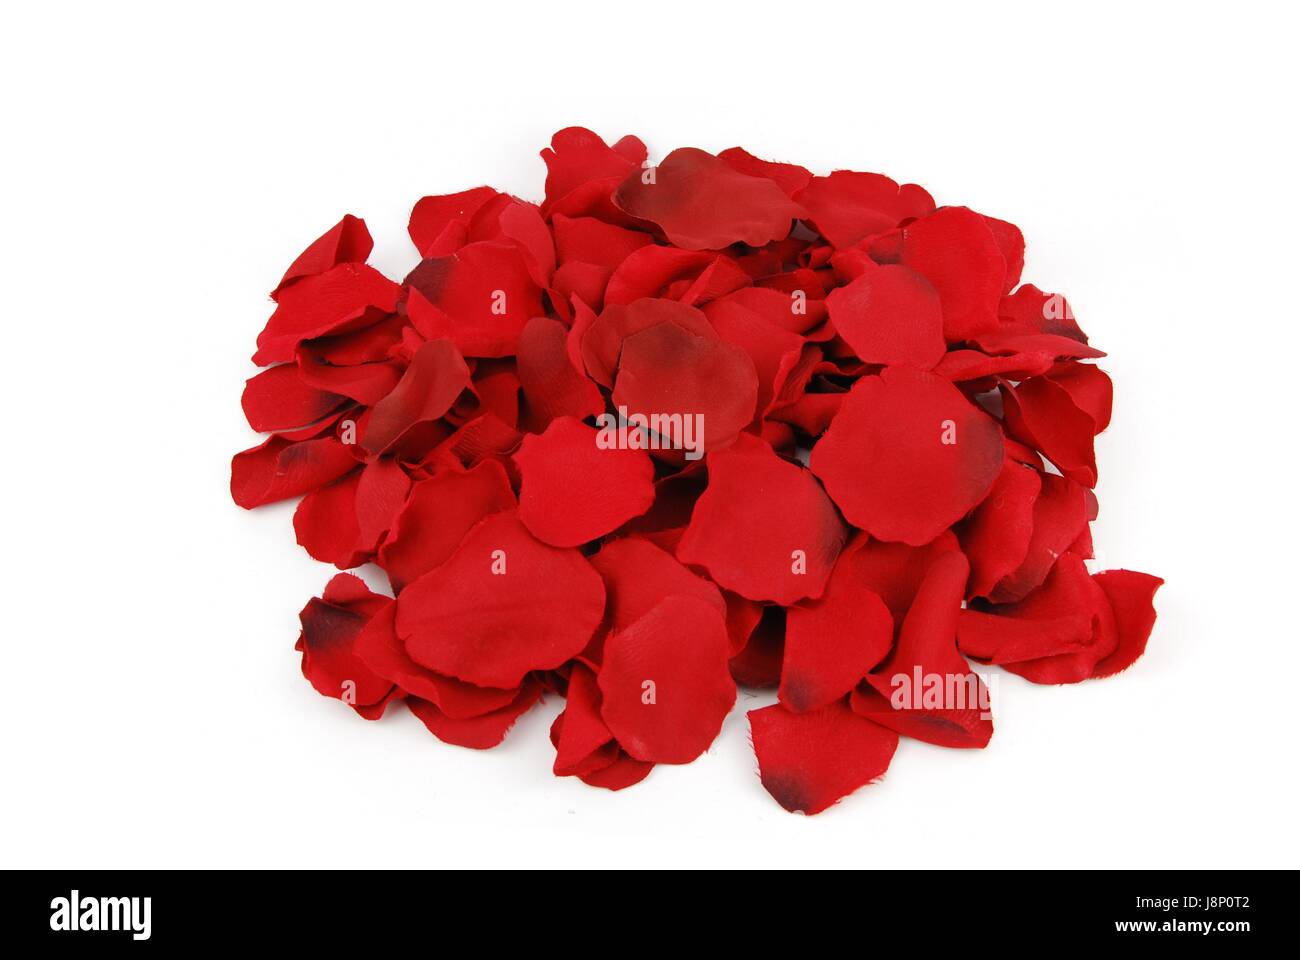 flower, plant, rose, petal, passion, love, in love, fell in love, valentine, Stock Photo